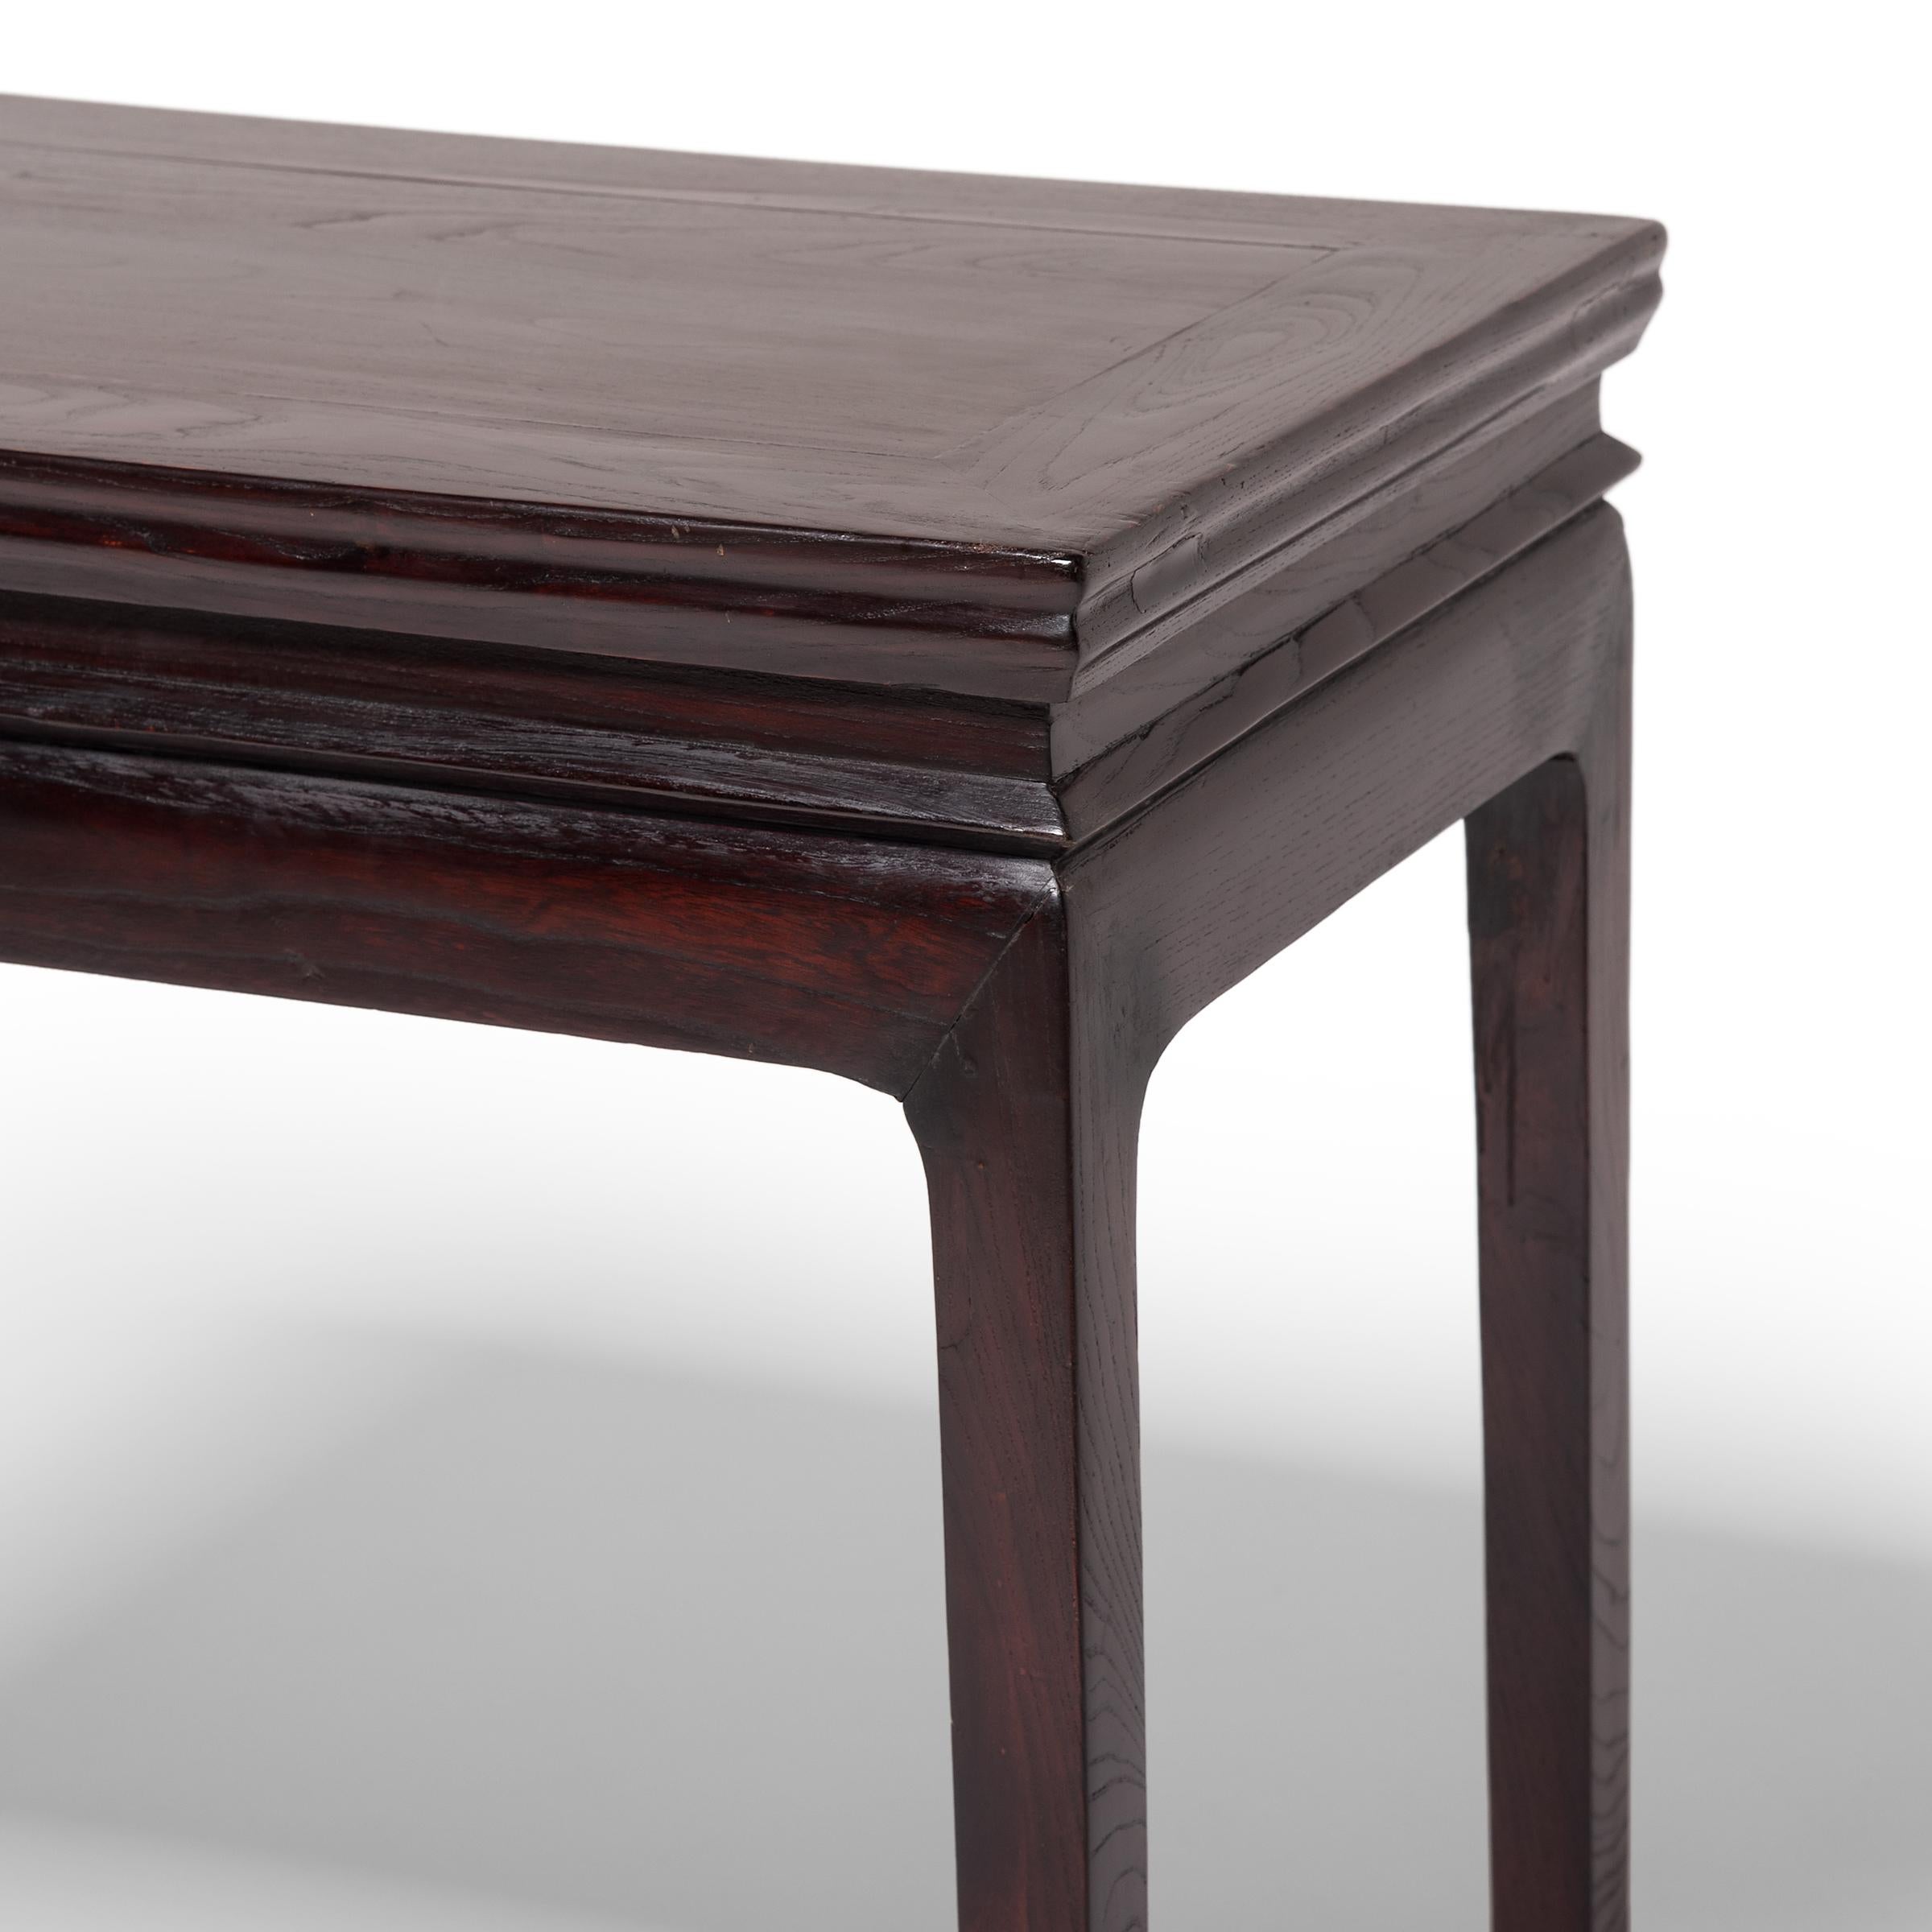 Elm Chinese Waisted Wine Table, c. 1850